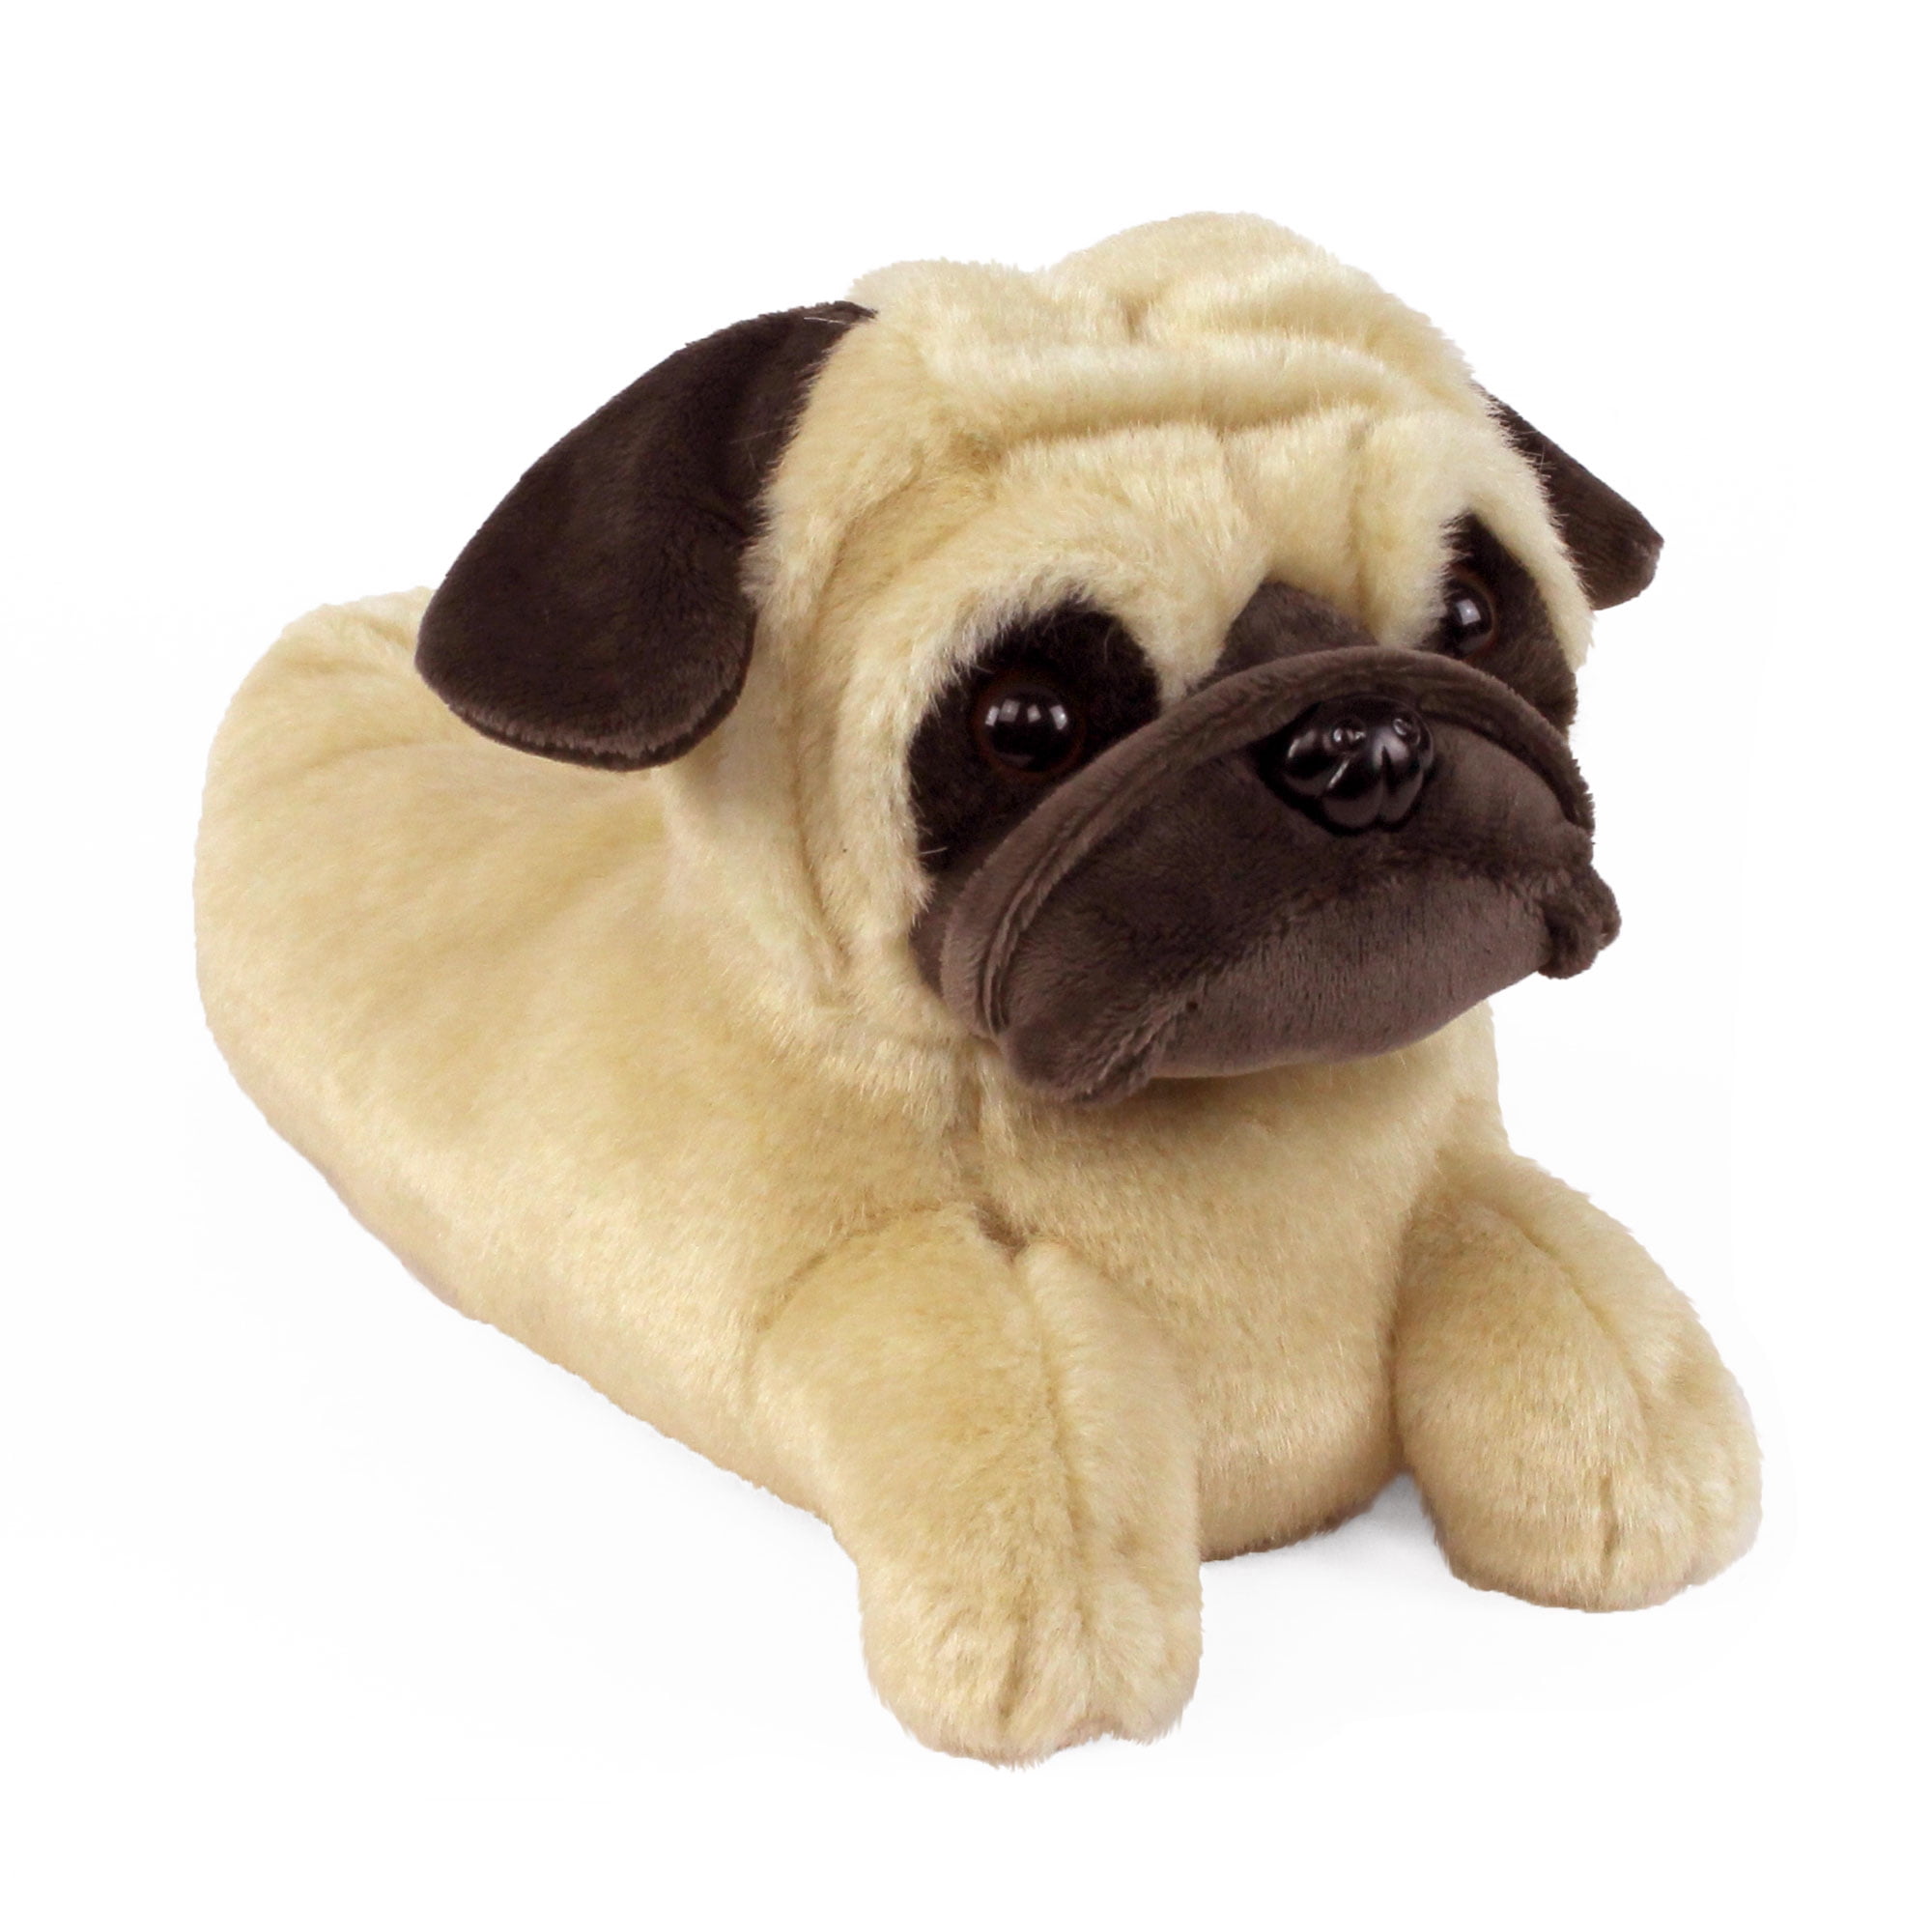 Silver Lilly Animal Slippers Plush Pug Dog Slippers